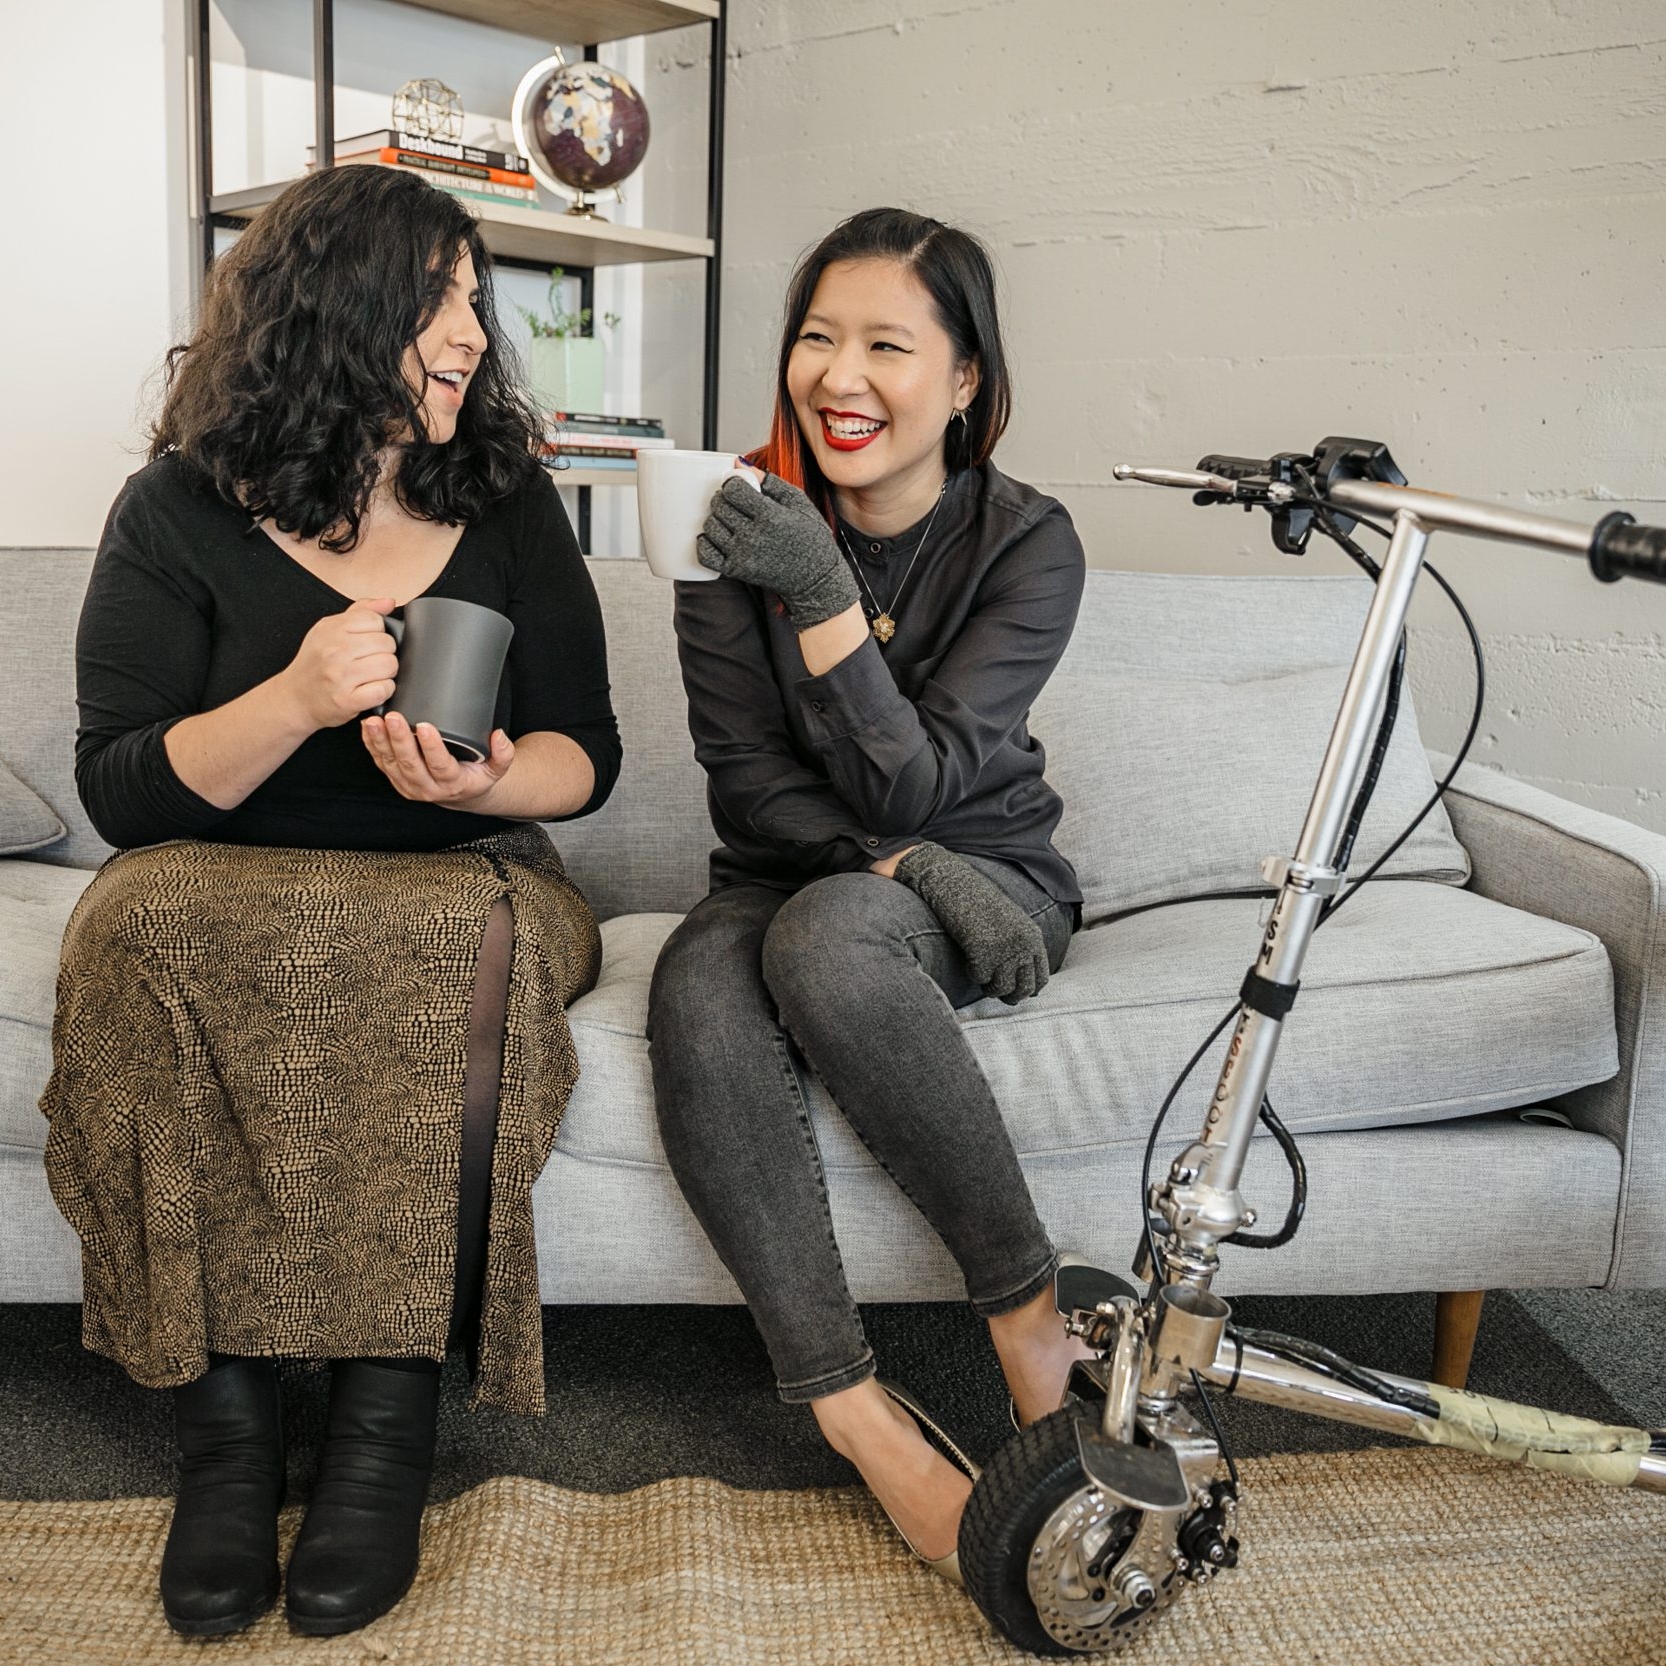 A Latinx disabled woman and an Asian disabled genderfluid person chat and sit on a couch, both holding coffee mugs. An electric lightweight mobility scooter rests on the side.